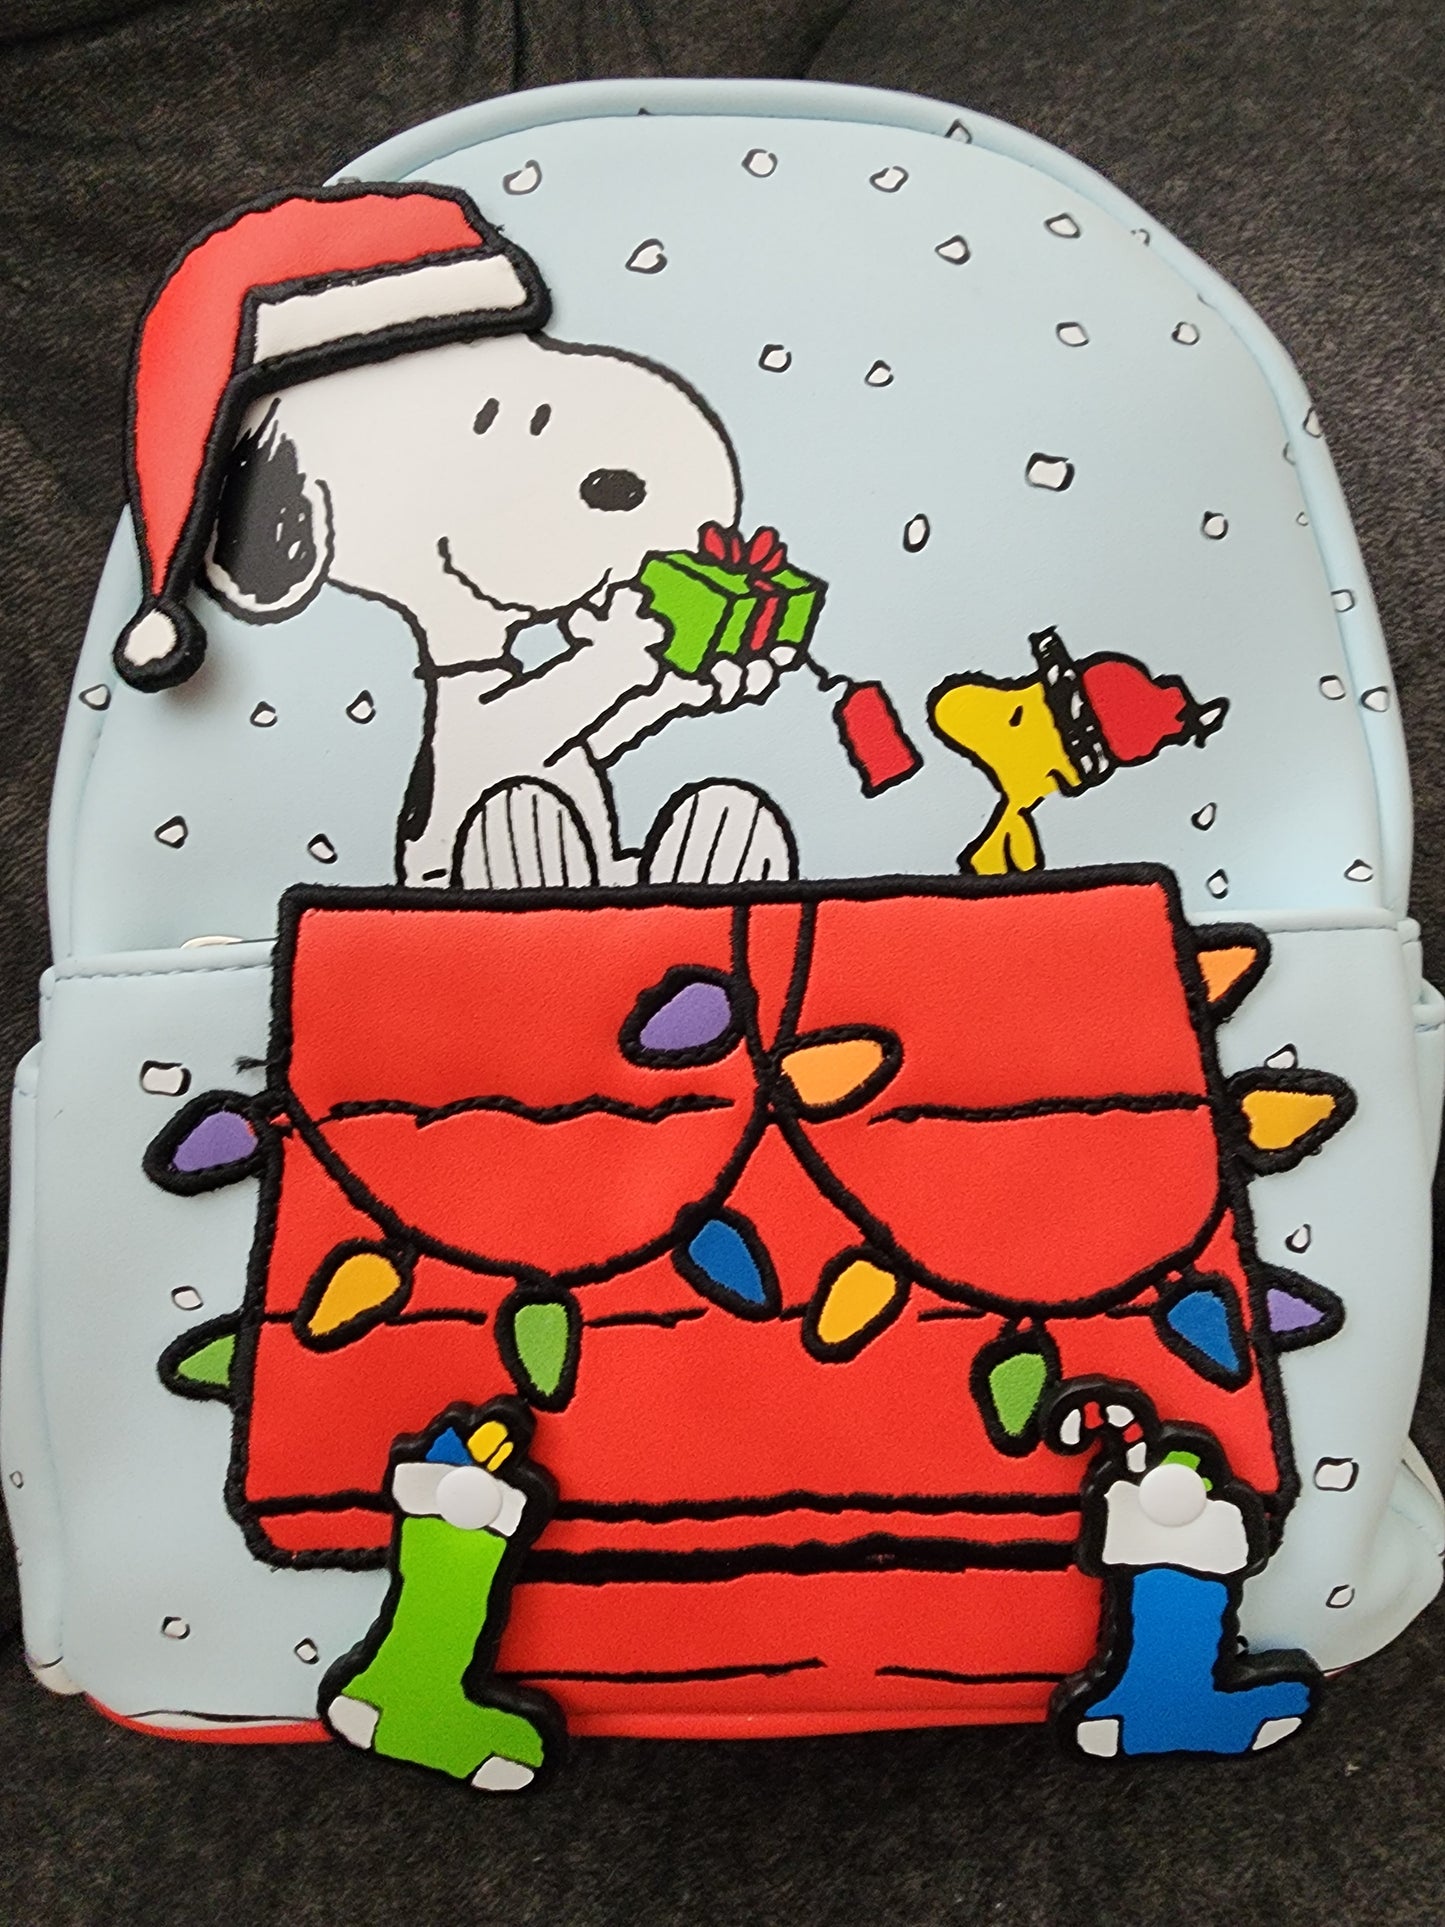 Loungefly Peanuts Snoopy and Woodstock Christmas Backpack